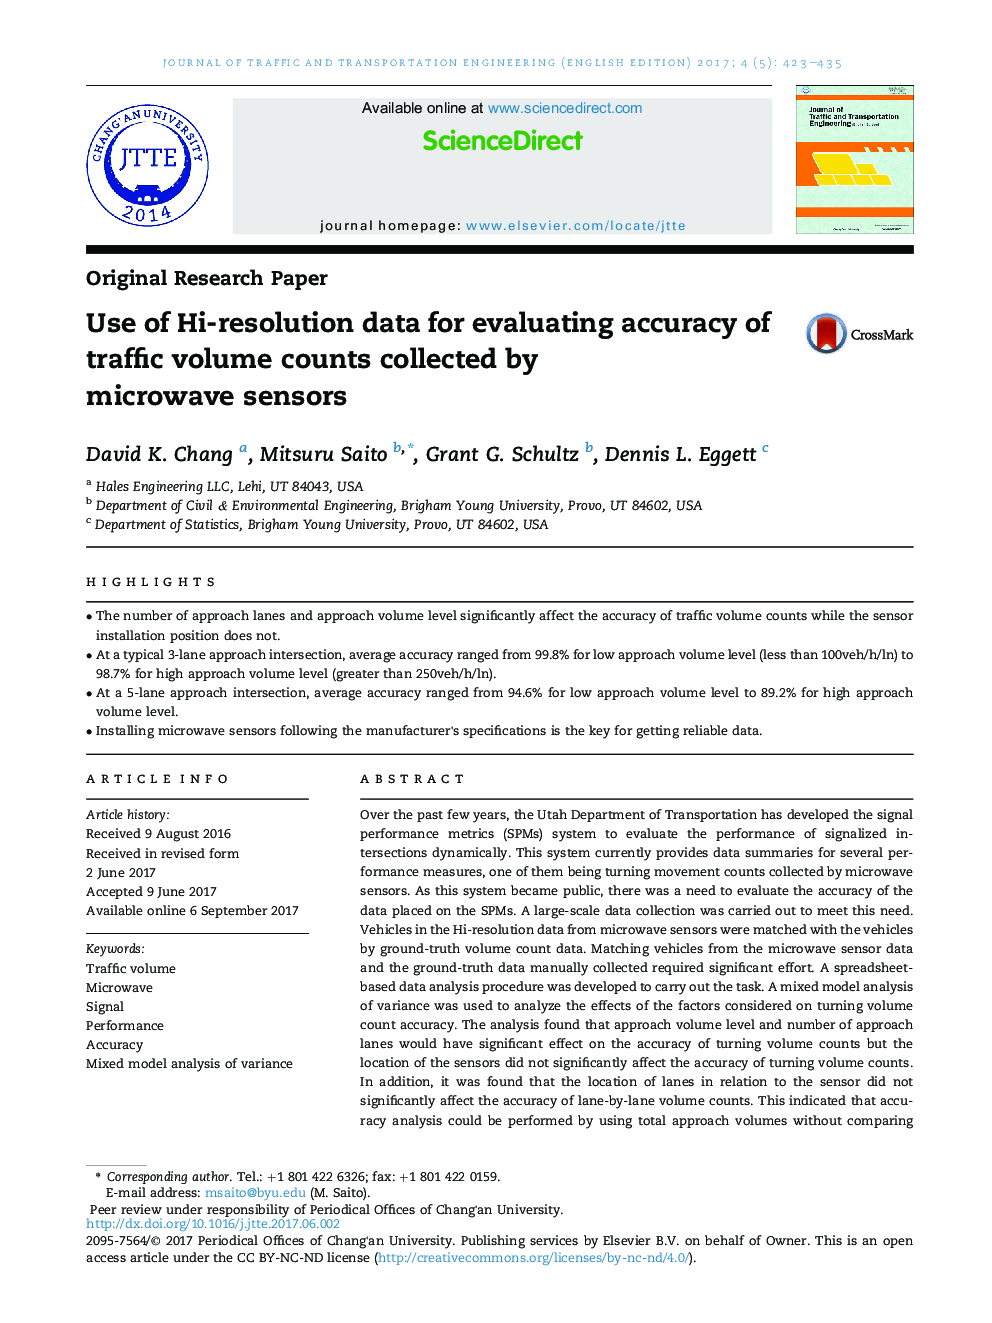 Use of Hi-resolution data for evaluating accuracy of traffic volume counts collected by microwave sensors